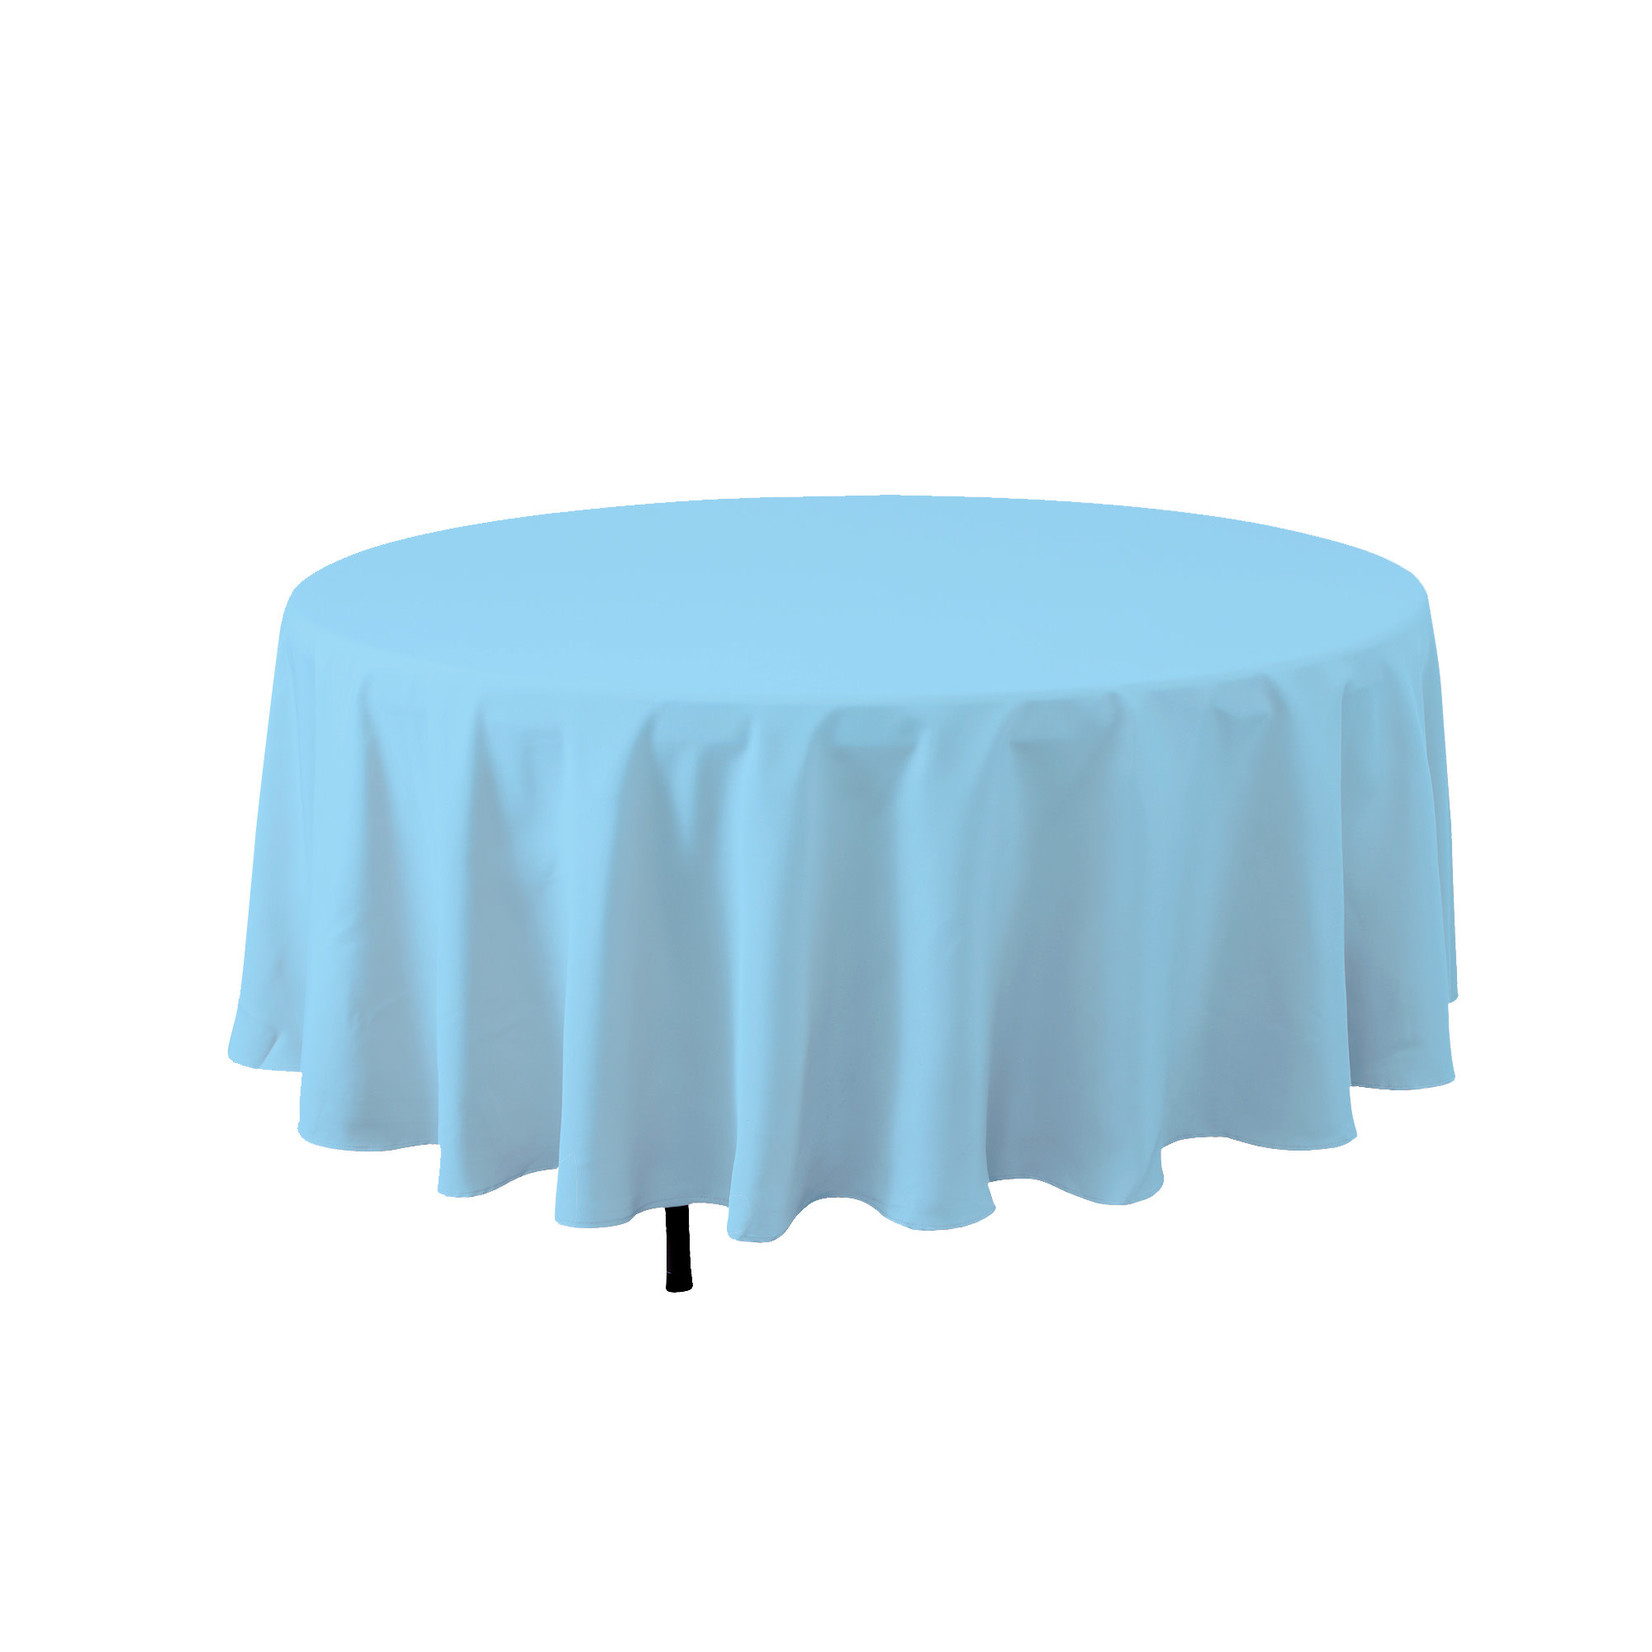 108’’ BLUE ROUND TABLE COVER